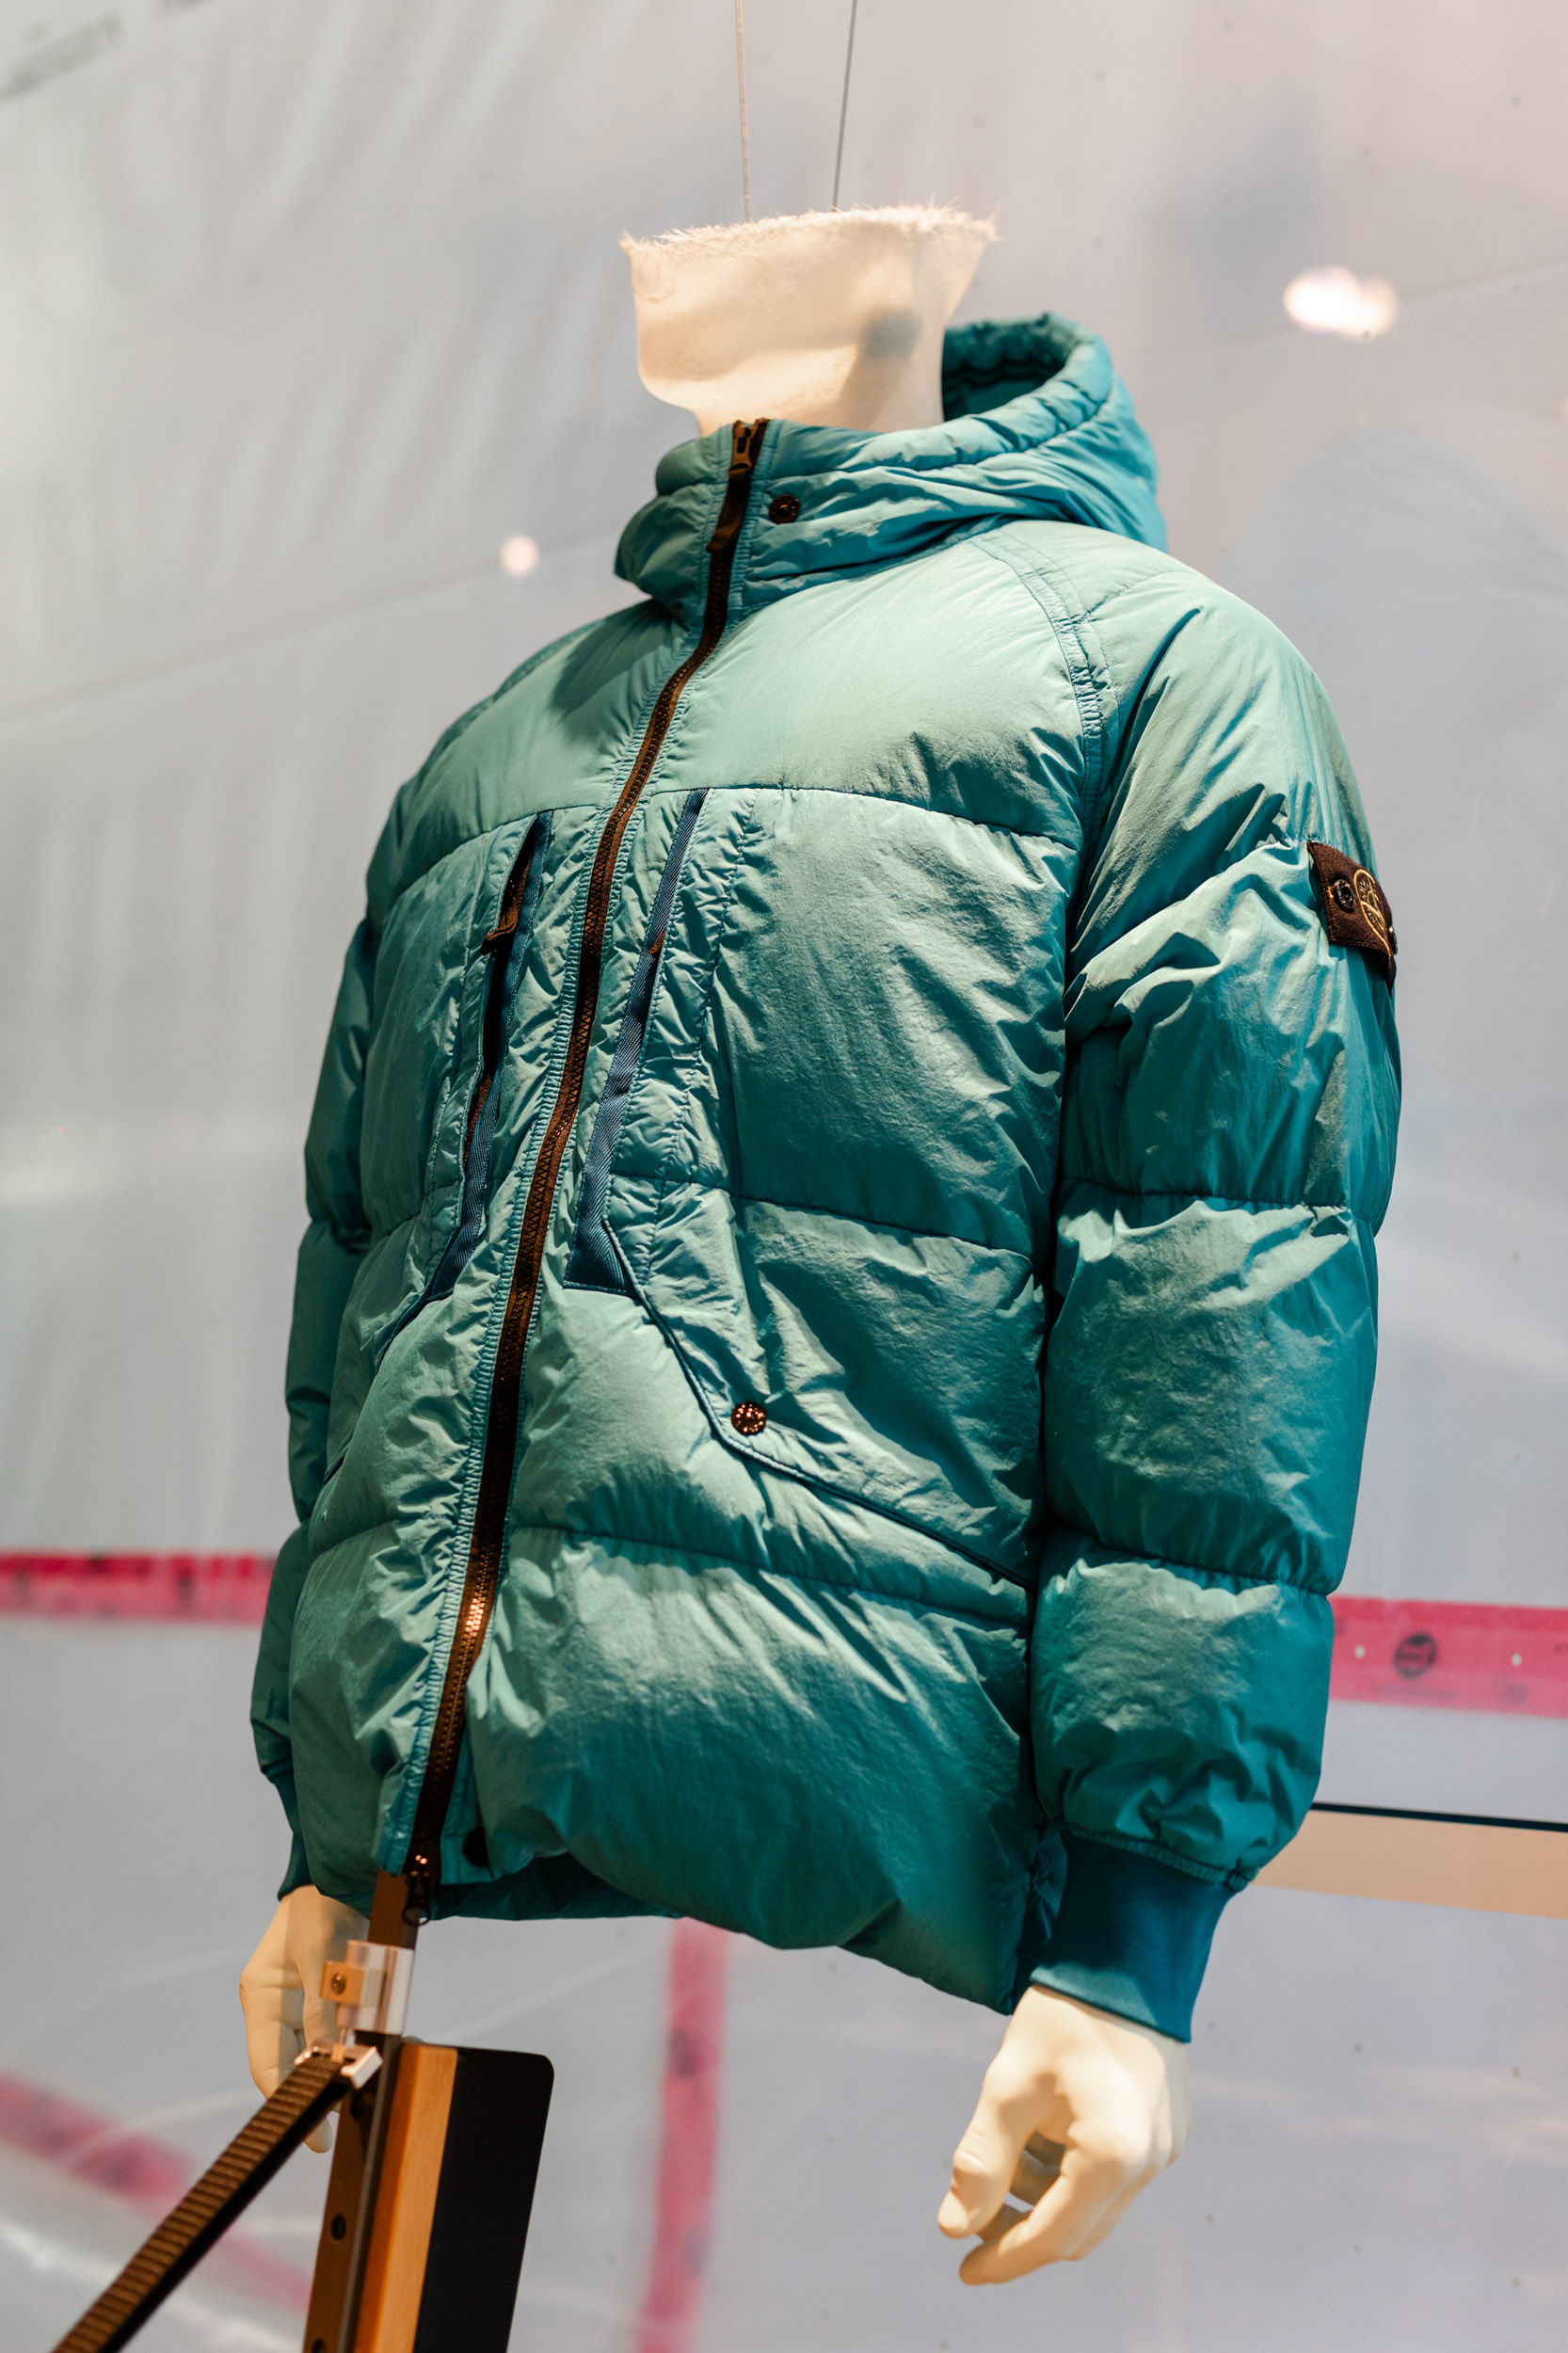 stone island puffer jacket is displayed in a display case.